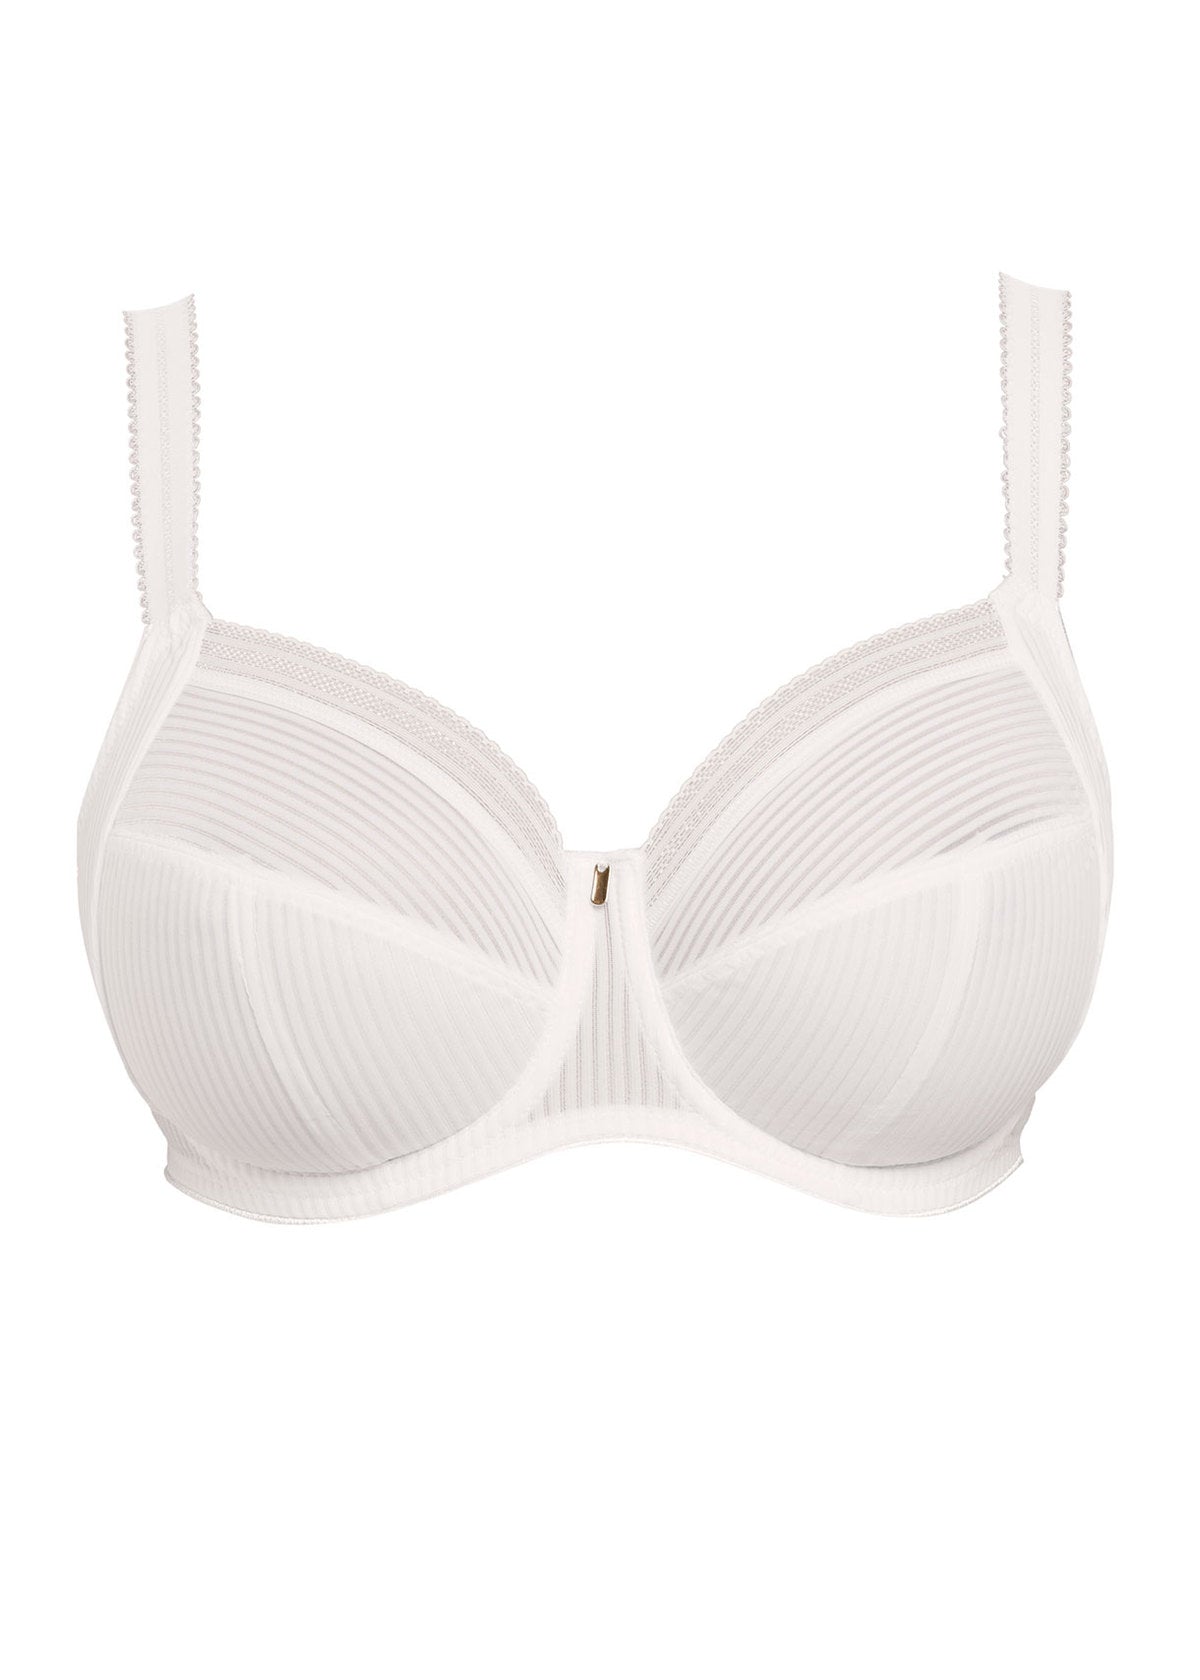 Buy Fantasie Womens Fusion Underwire Full Cup Side Support Bra